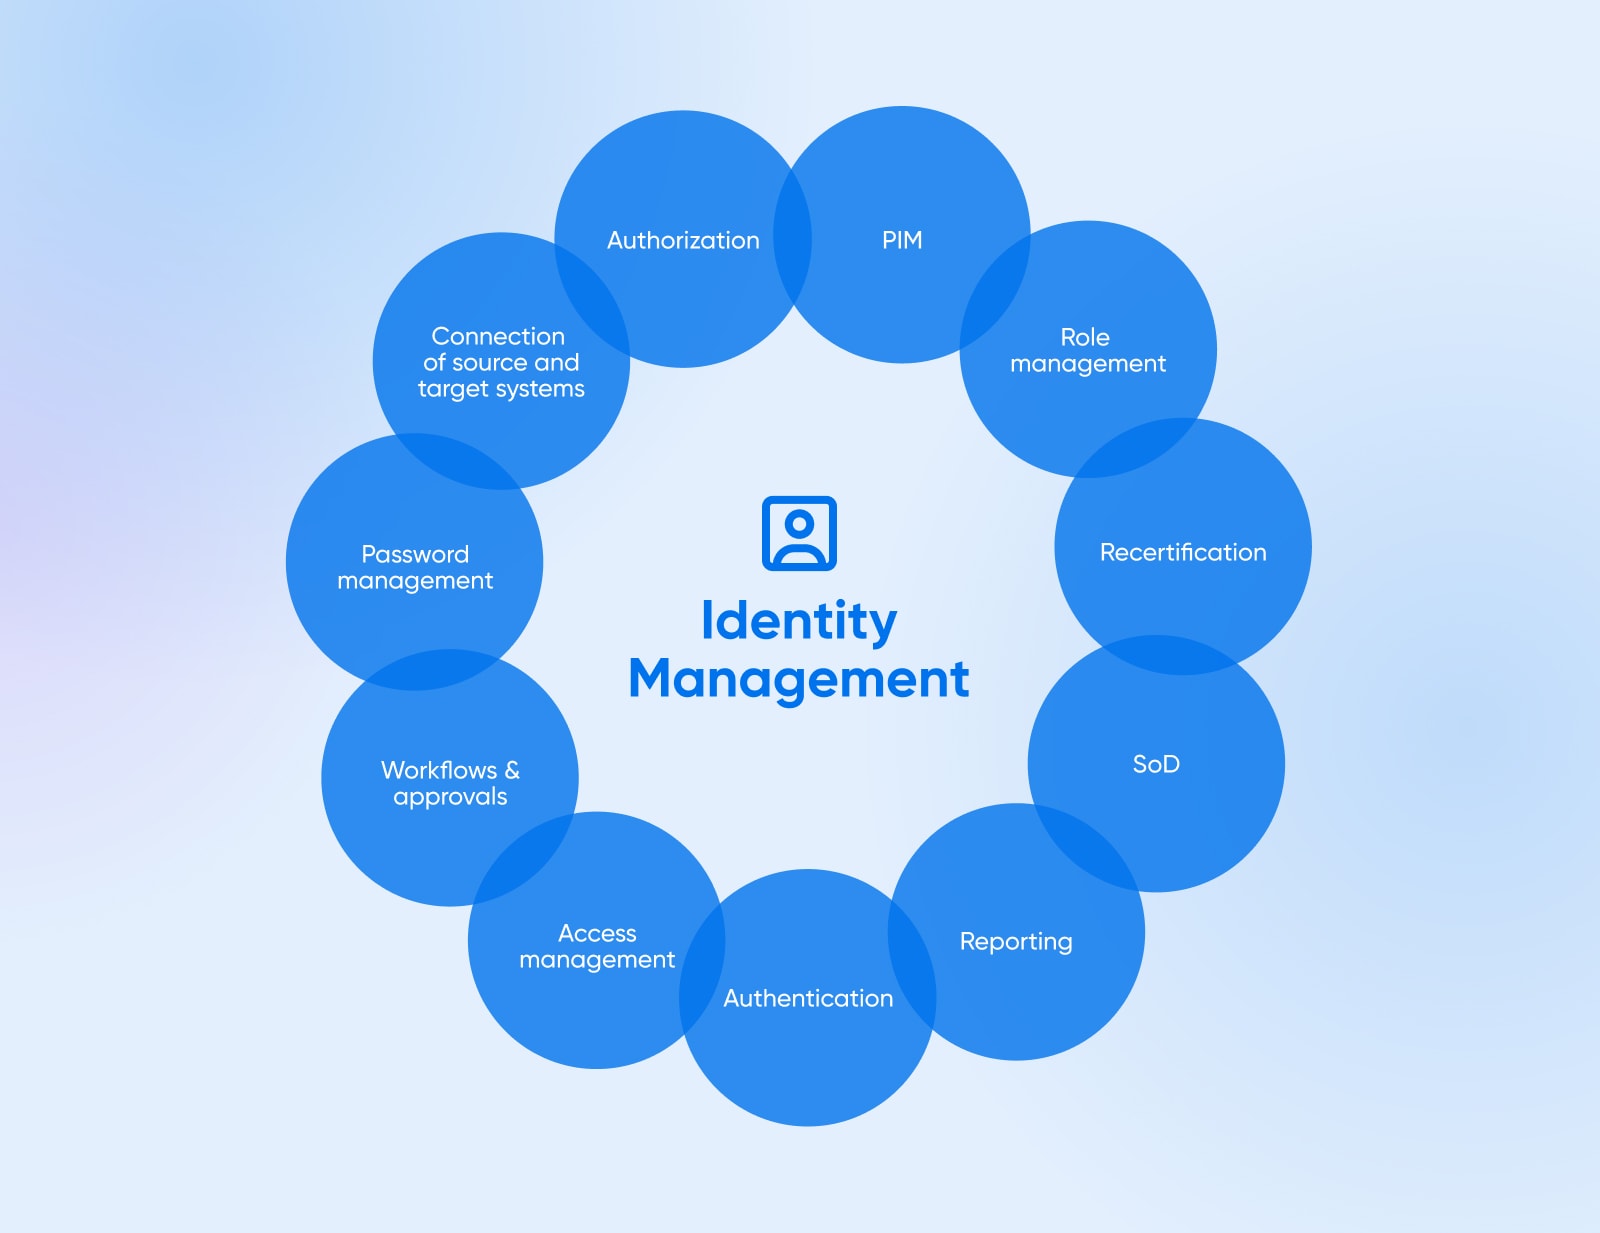 identify management in the middle surrounded by various bubbles: PIM, role management, recertification, SoD, reporting, authentication, access management, workflows + approvals, password management, connectin of source and target systems, authorization